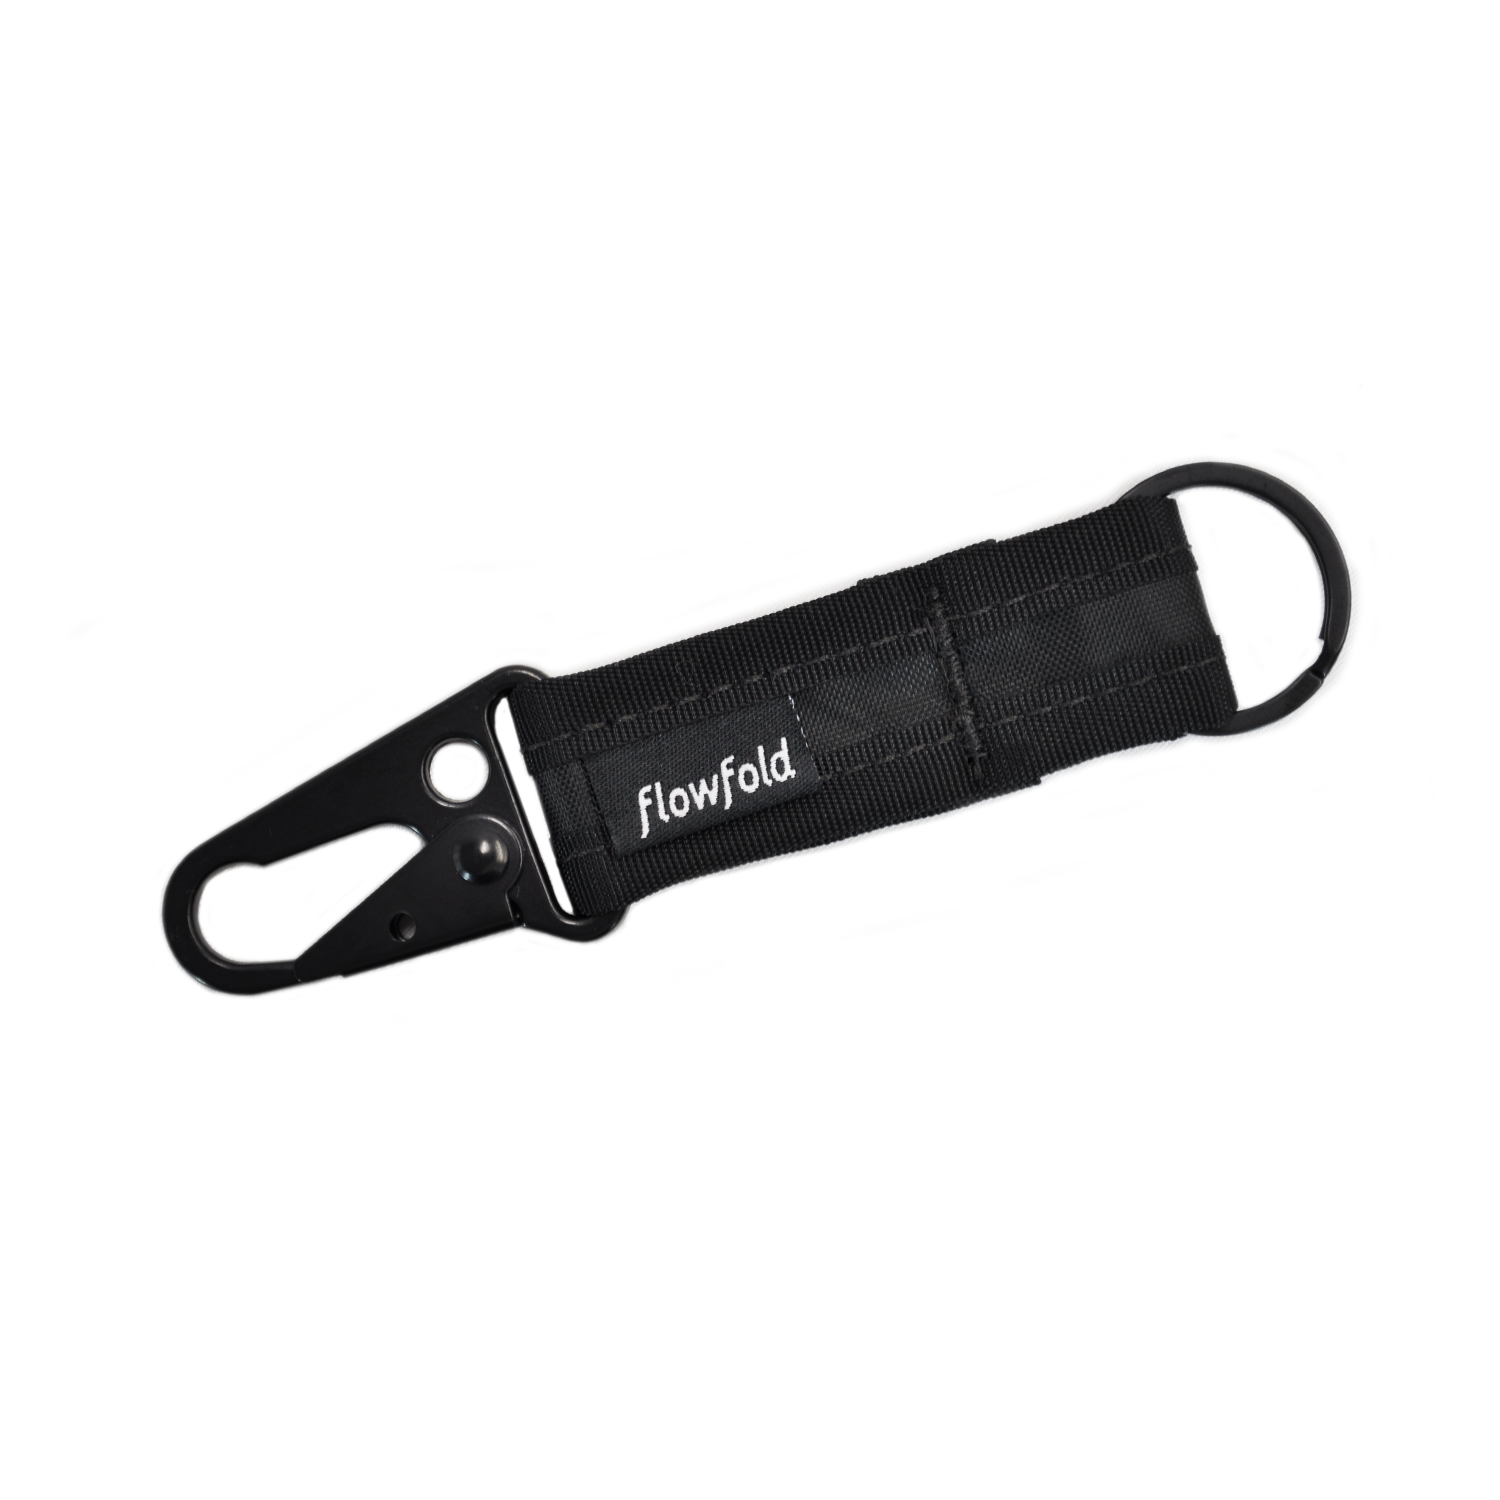 Flowfold Recycled Black/Black Snap Hook Keychain made from water resistant EcoPak